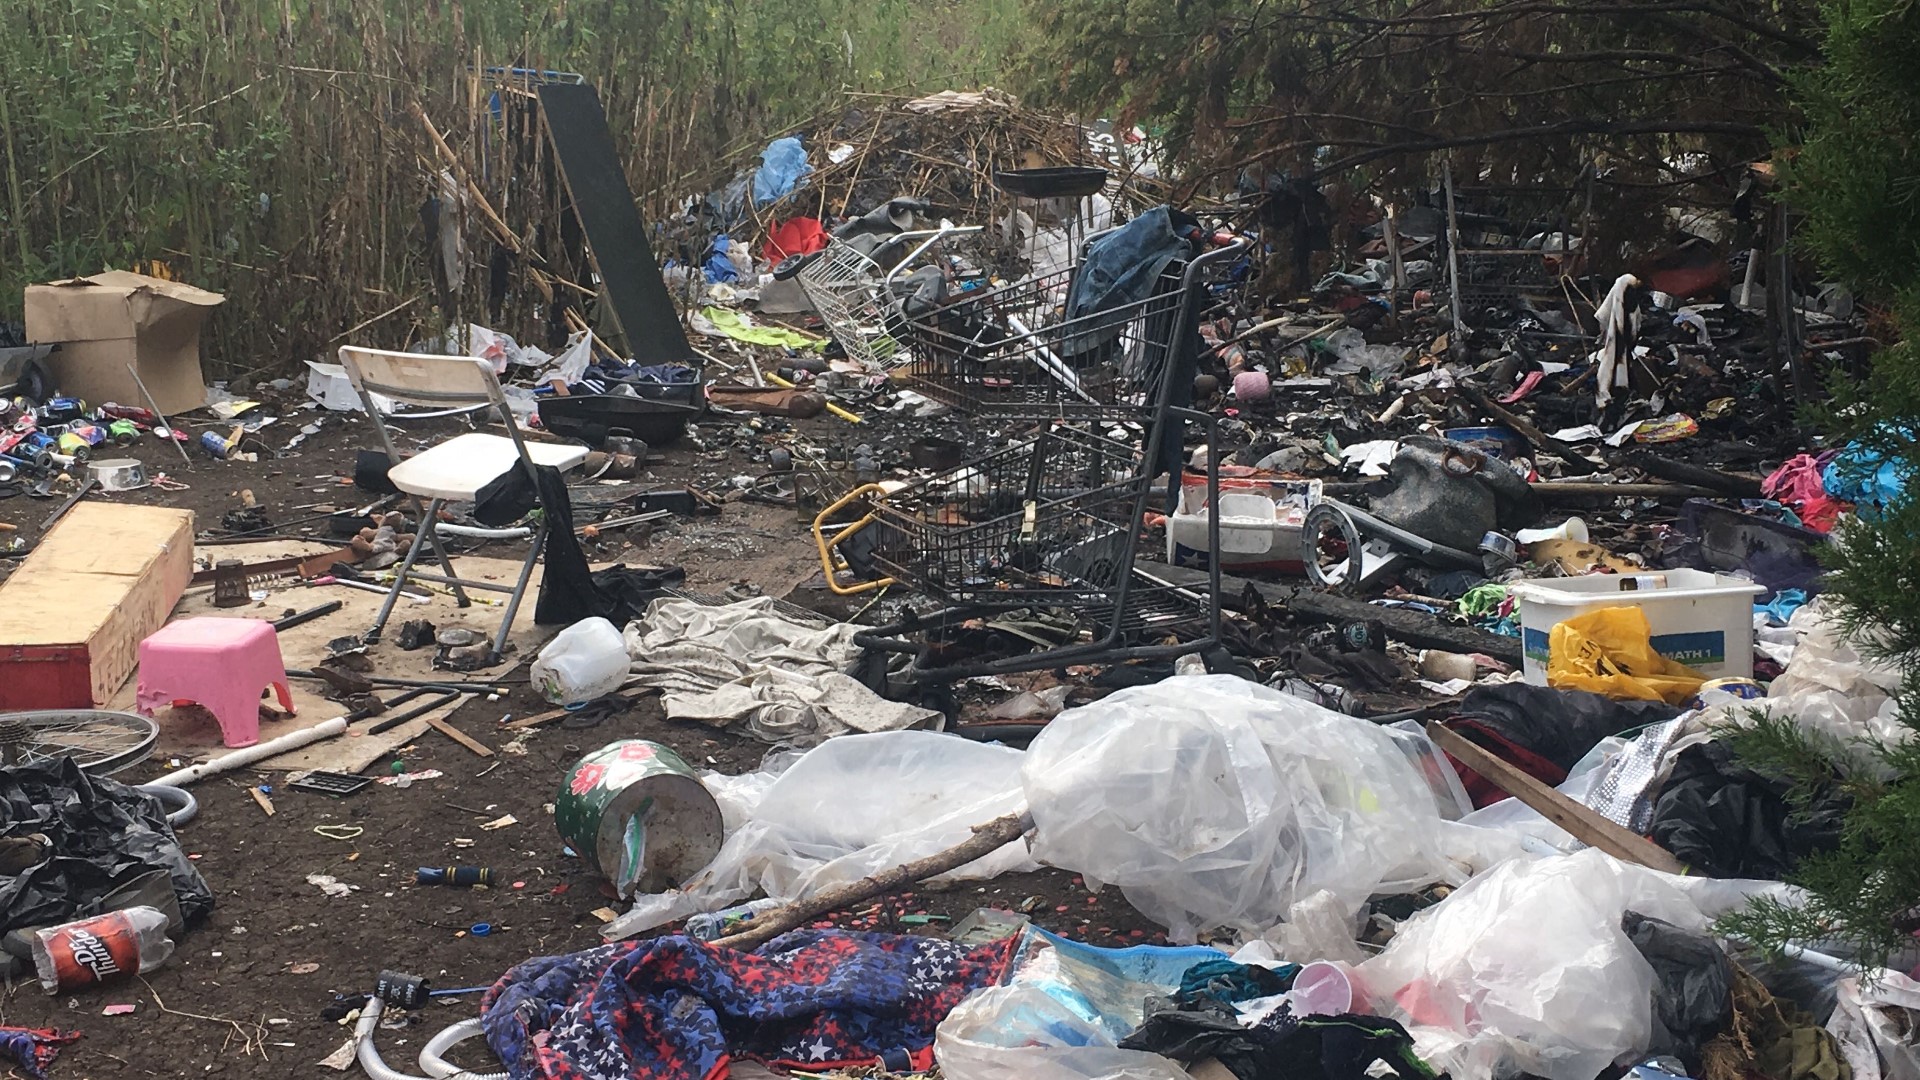 Waco police said the department received several complaints about the camps and has been working cleanup for a few weeks.